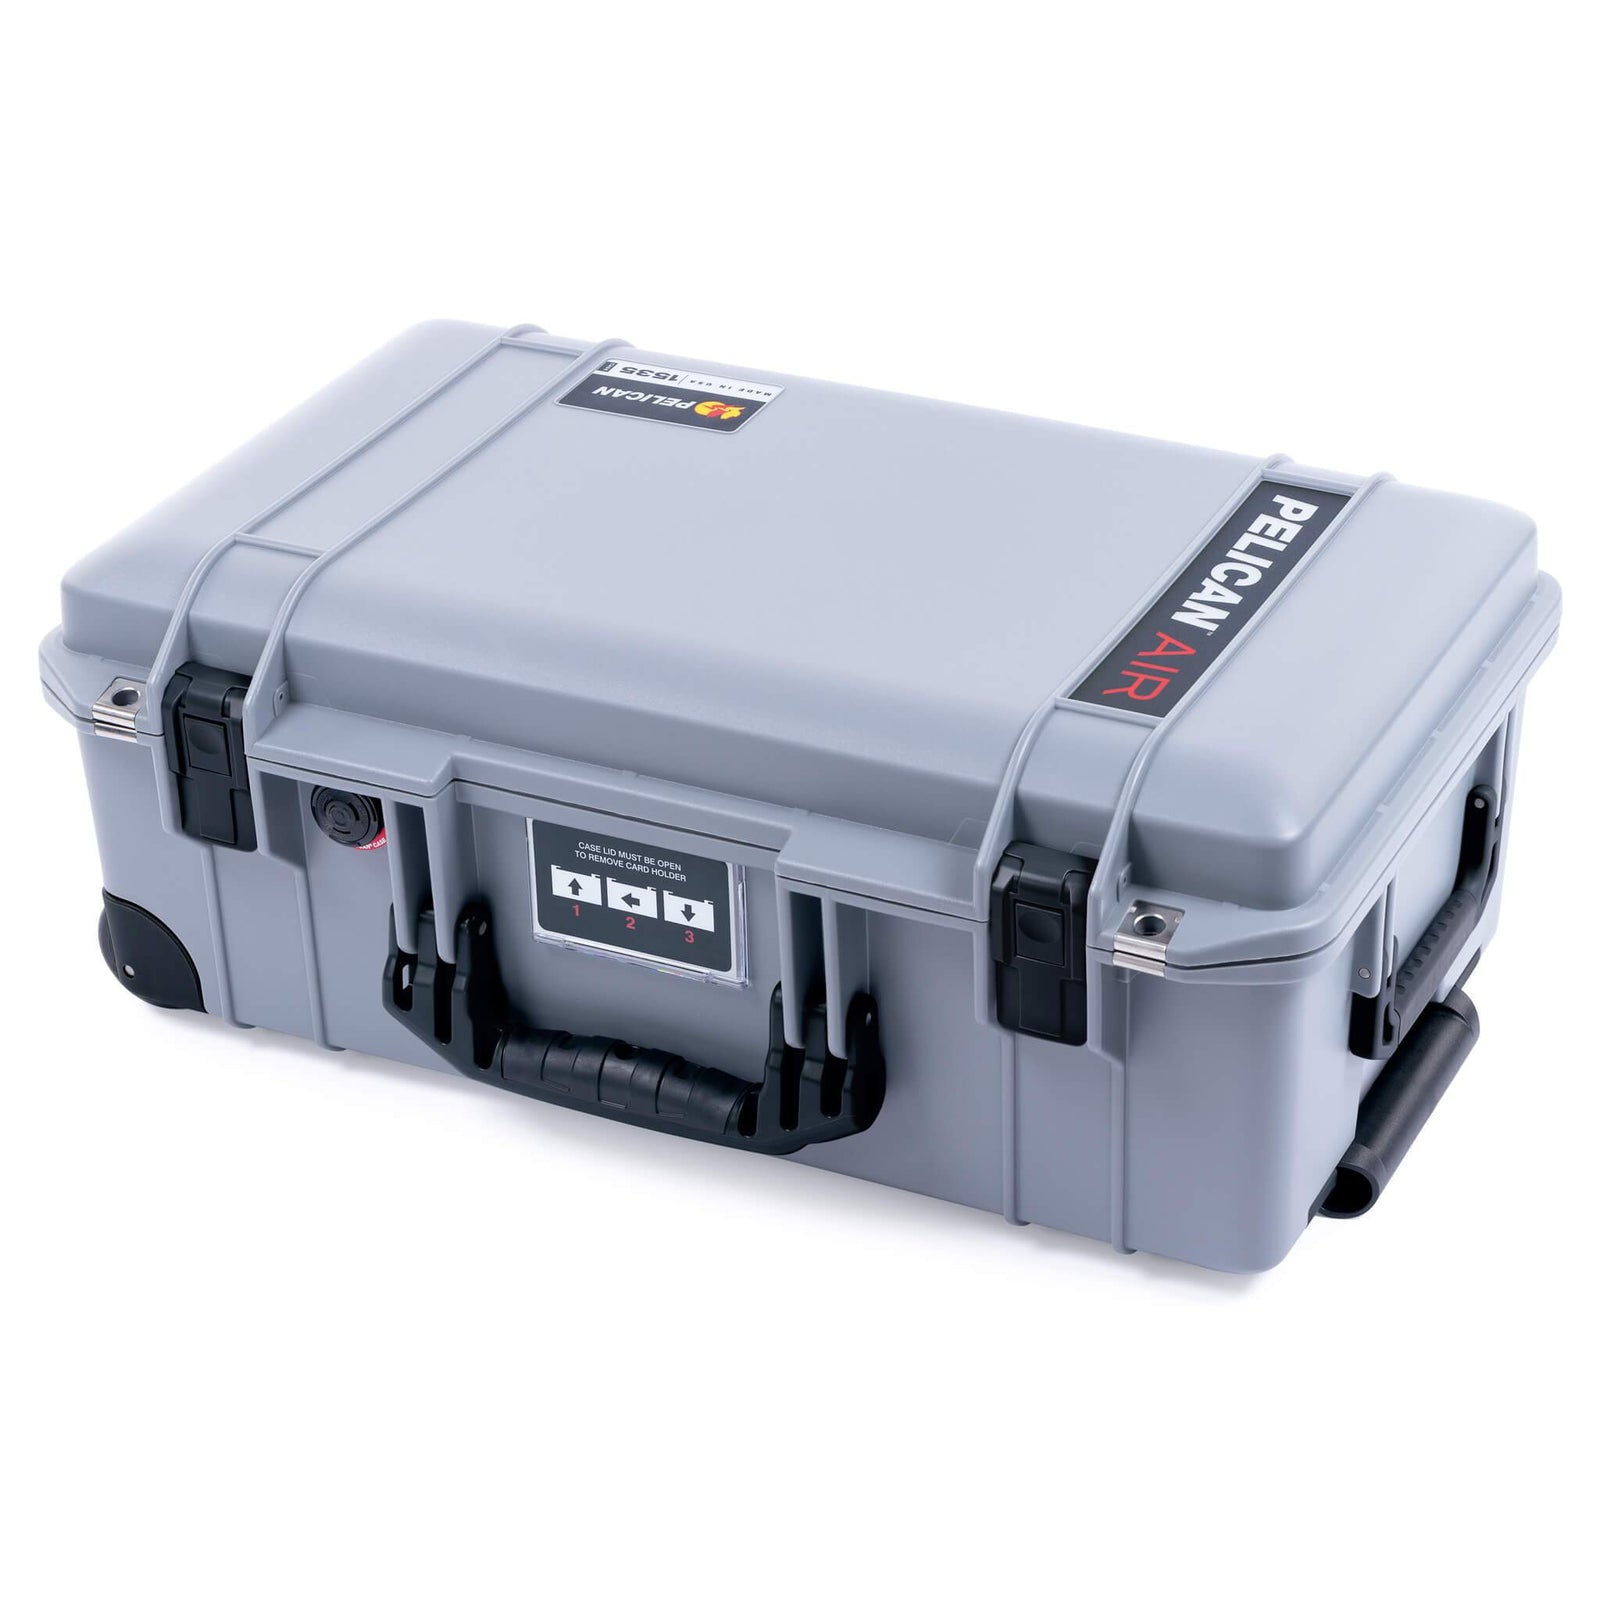 Pelican Luggage: Lightweight and Durable Travel Case Tagged 